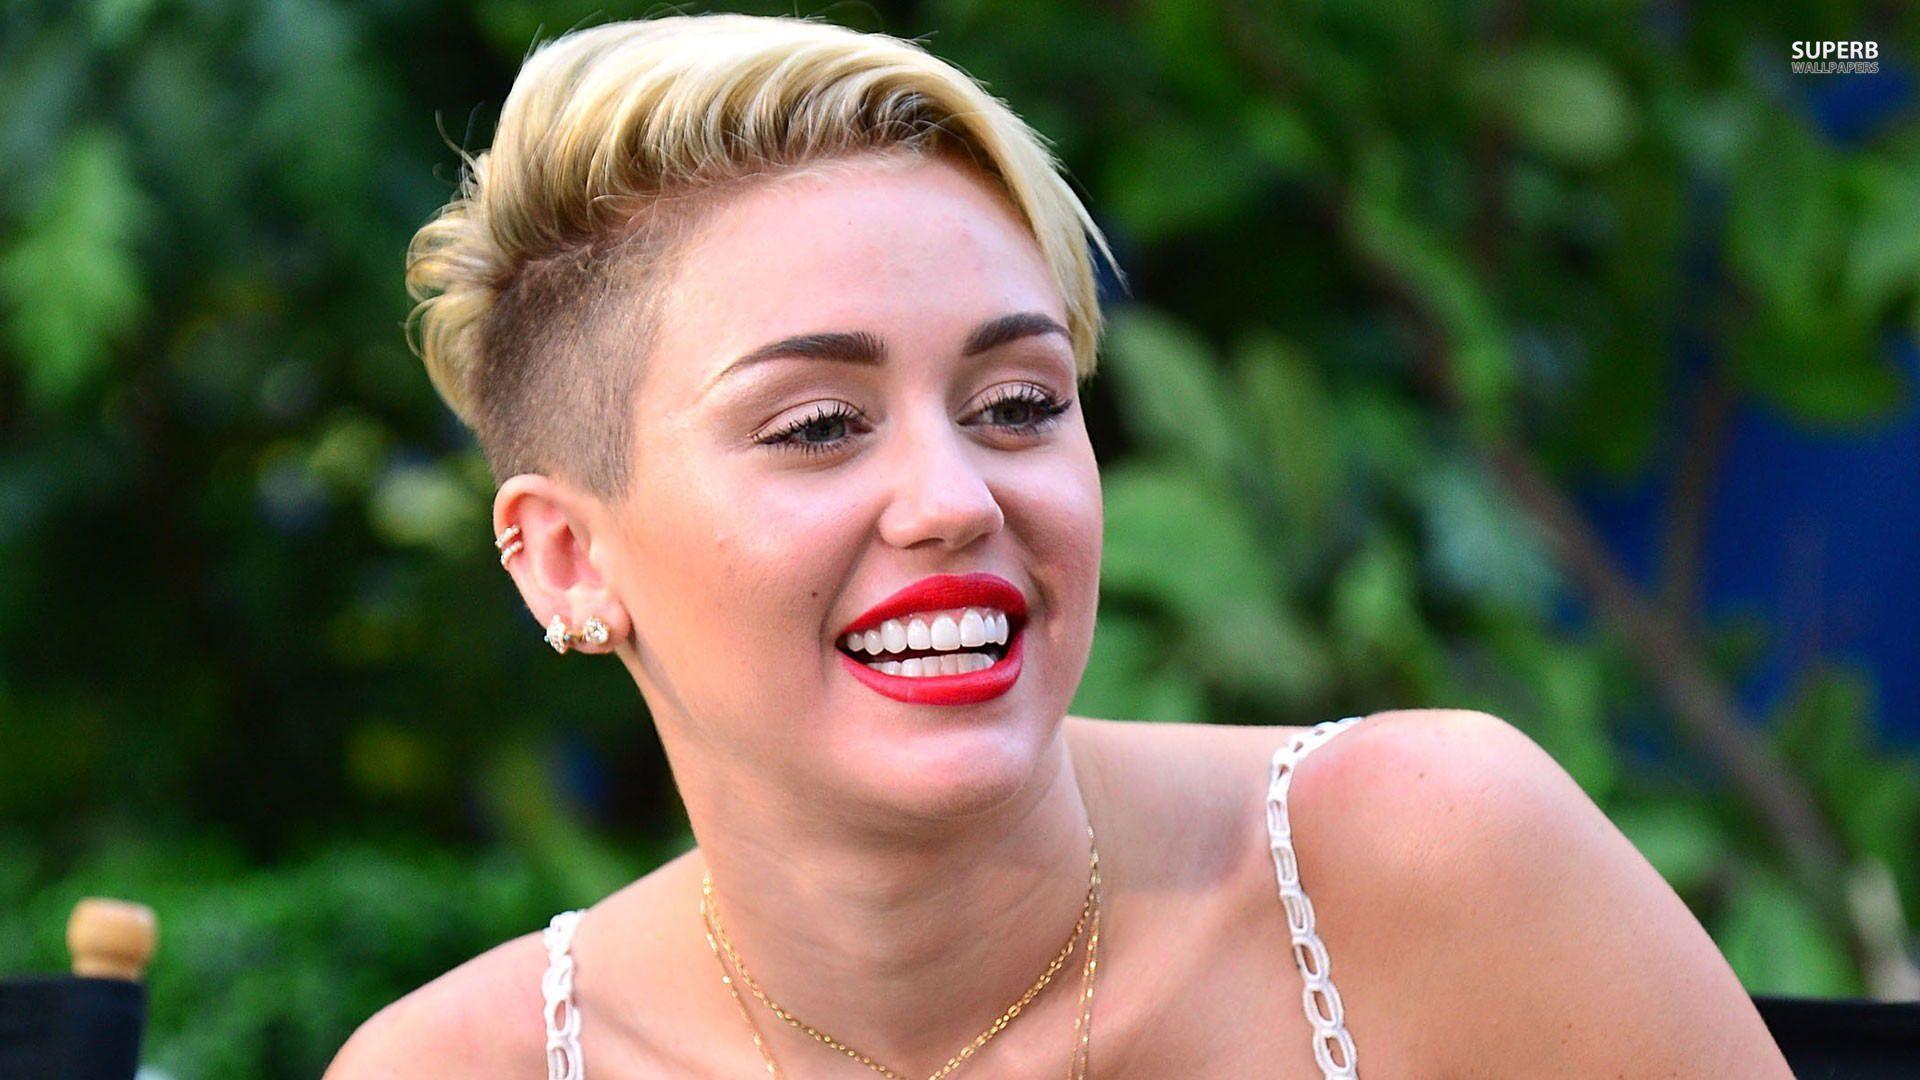 Miley Cyrus Wallpaper Image Photo Picture Background